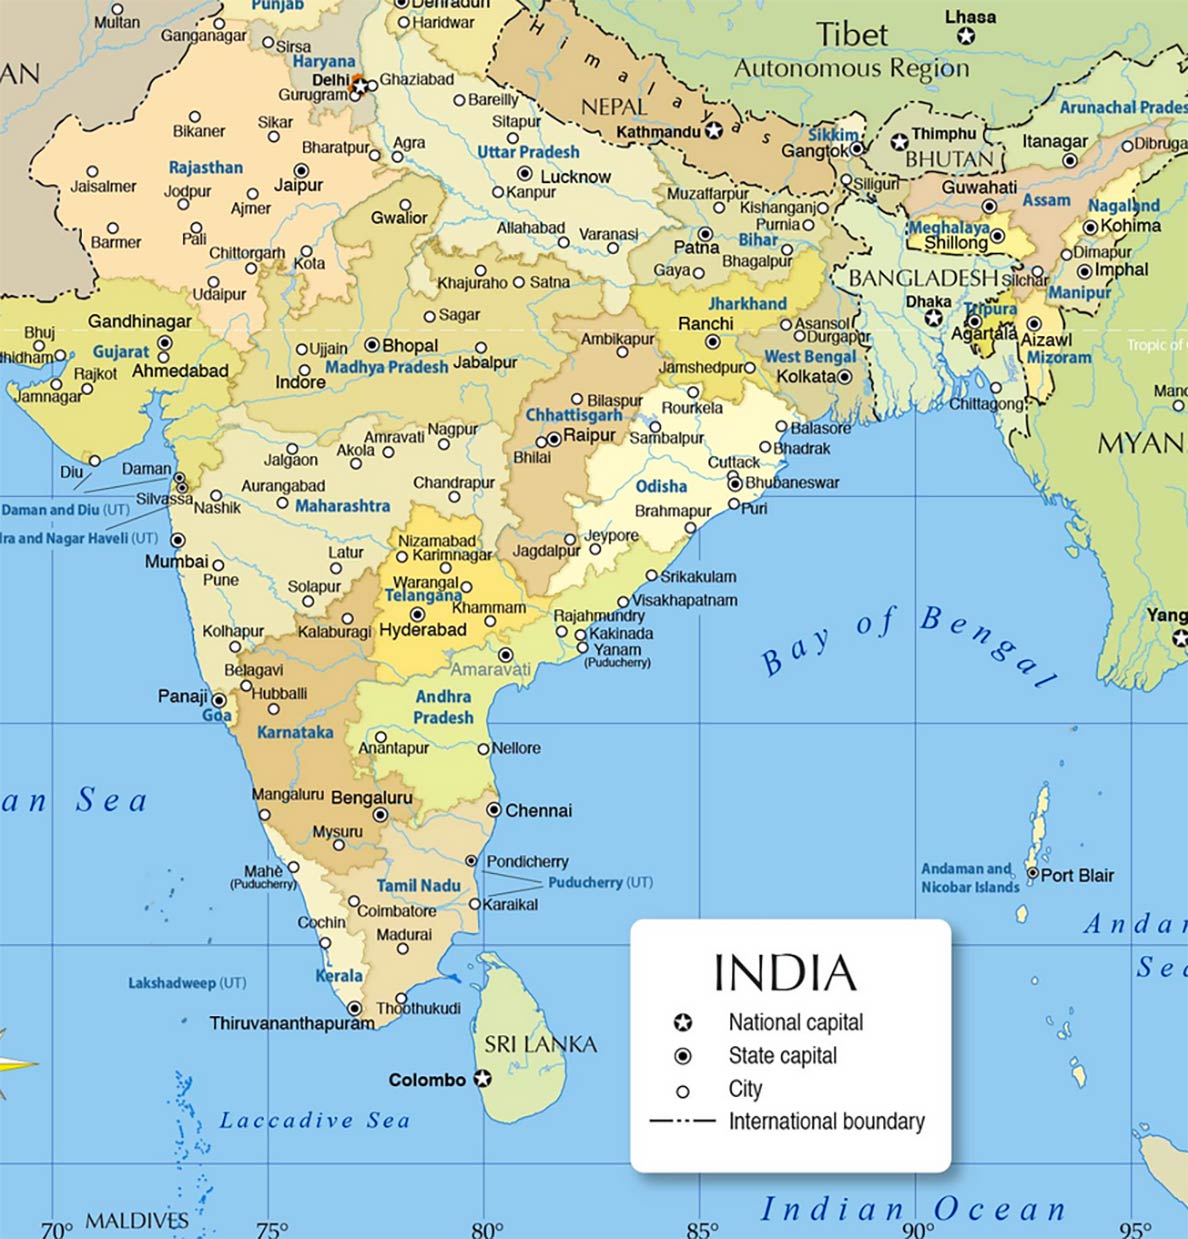 India - Country Profile, Facts, News and Original Articles